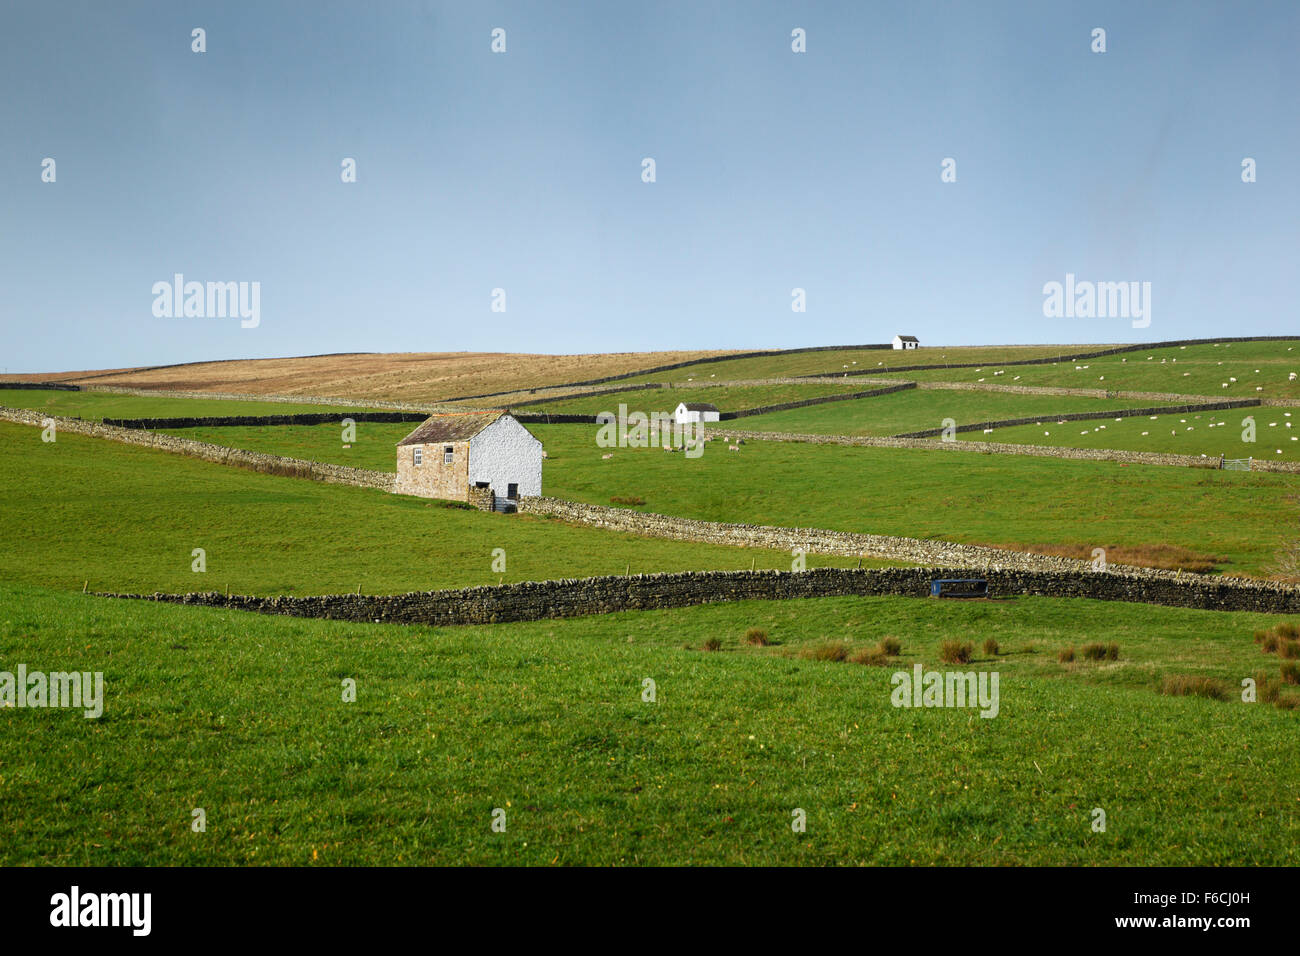 Barns and dry stone walls in Teesdale, Near Newbiggin. County Durham. England. UK. White washed barns are a distinctive feature Stock Photo